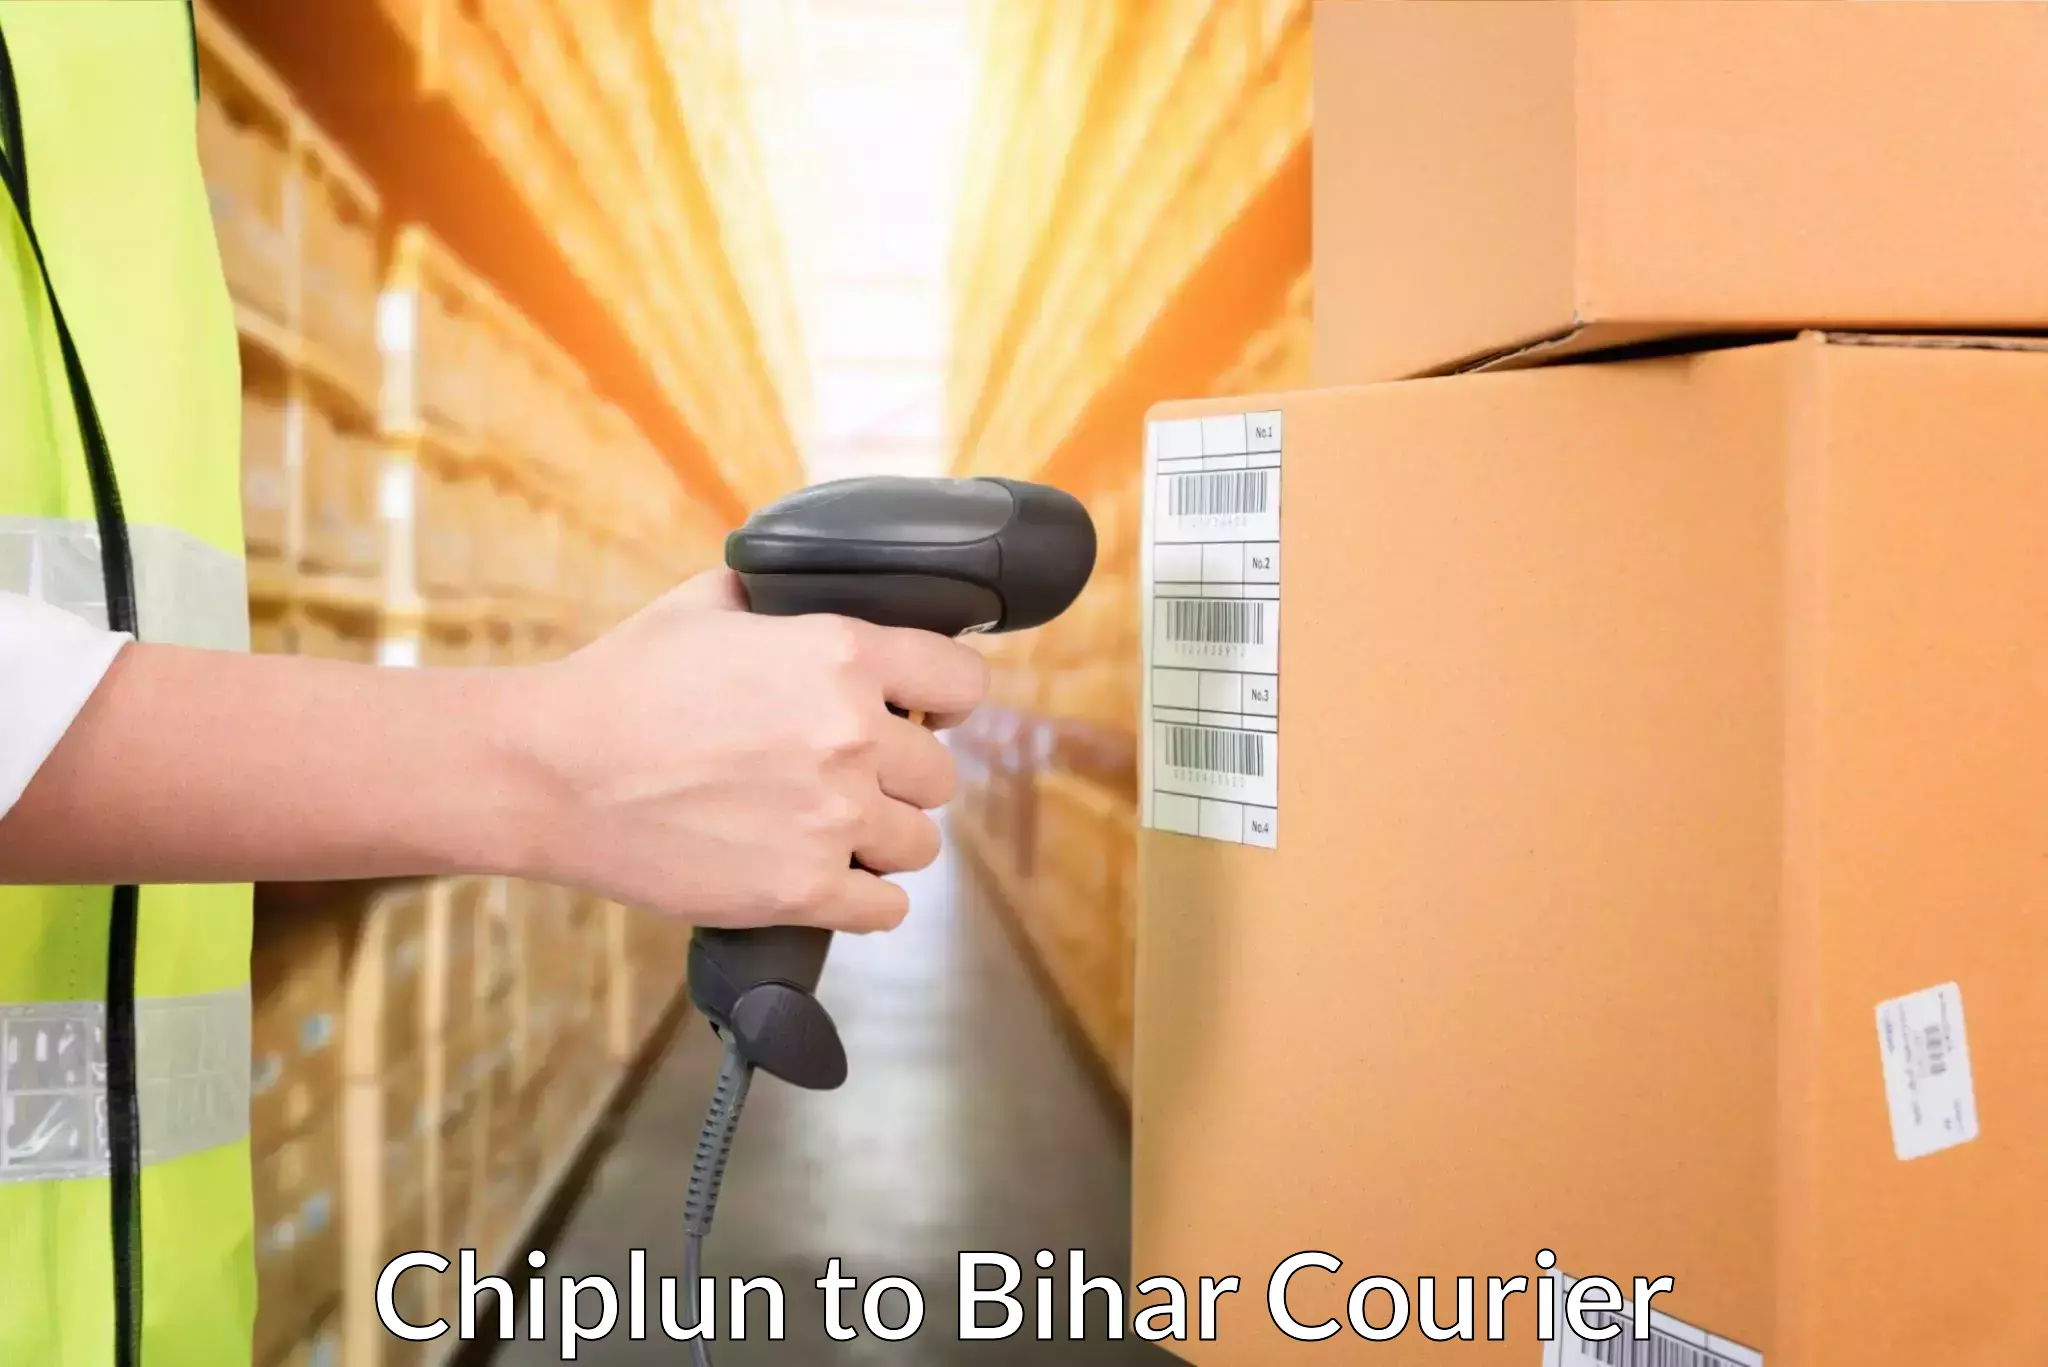 Courier service partnerships Chiplun to Mairwa